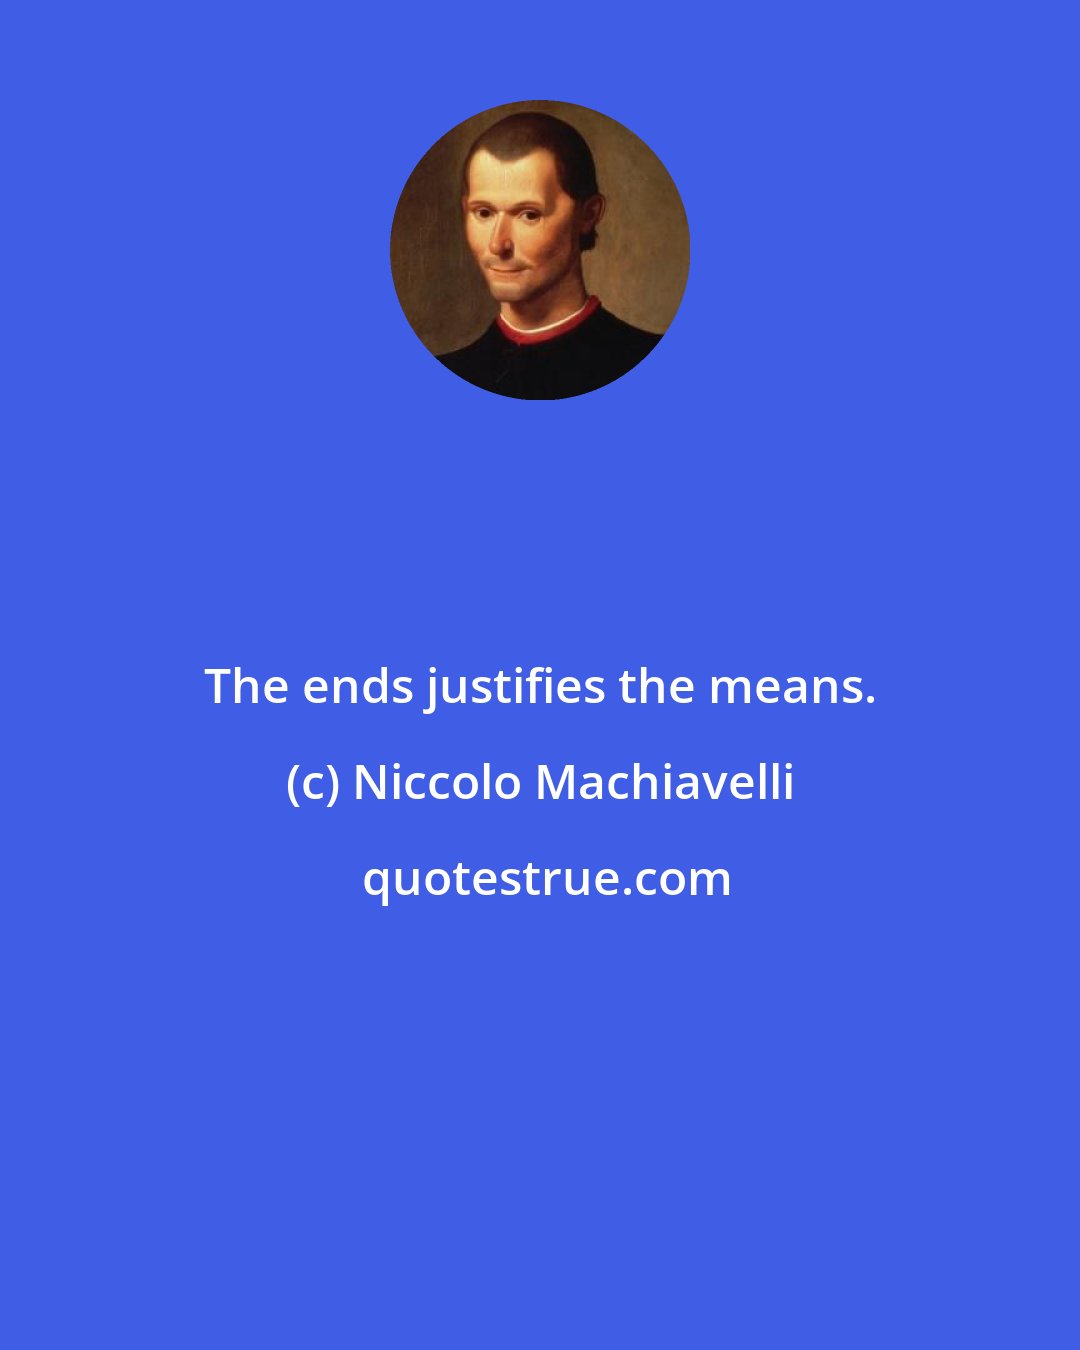 Niccolo Machiavelli: The ends justifies the means.